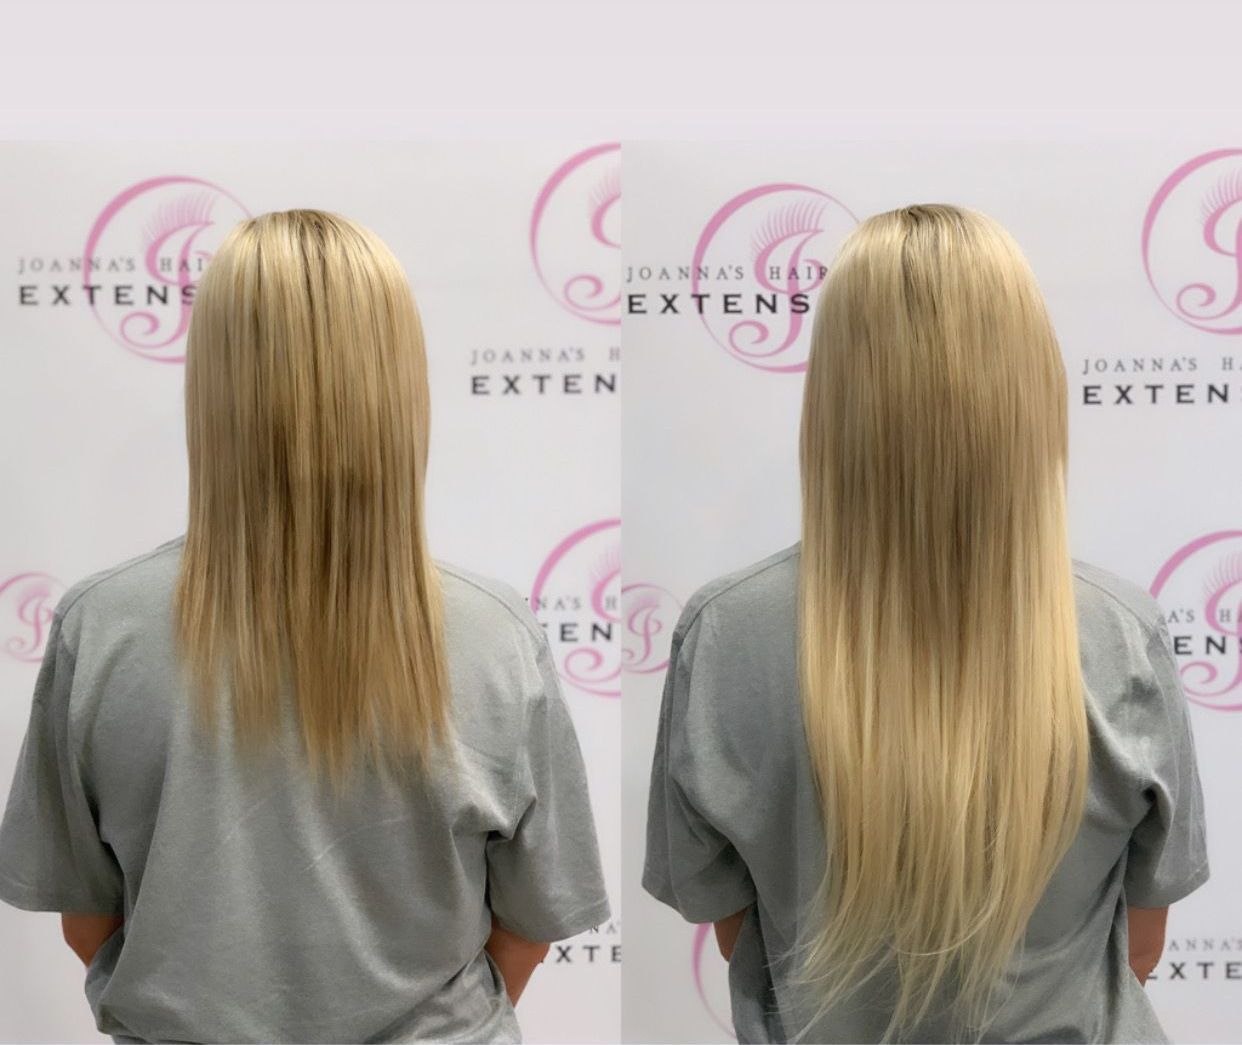 a before and after photo of a woman 's hair extensions